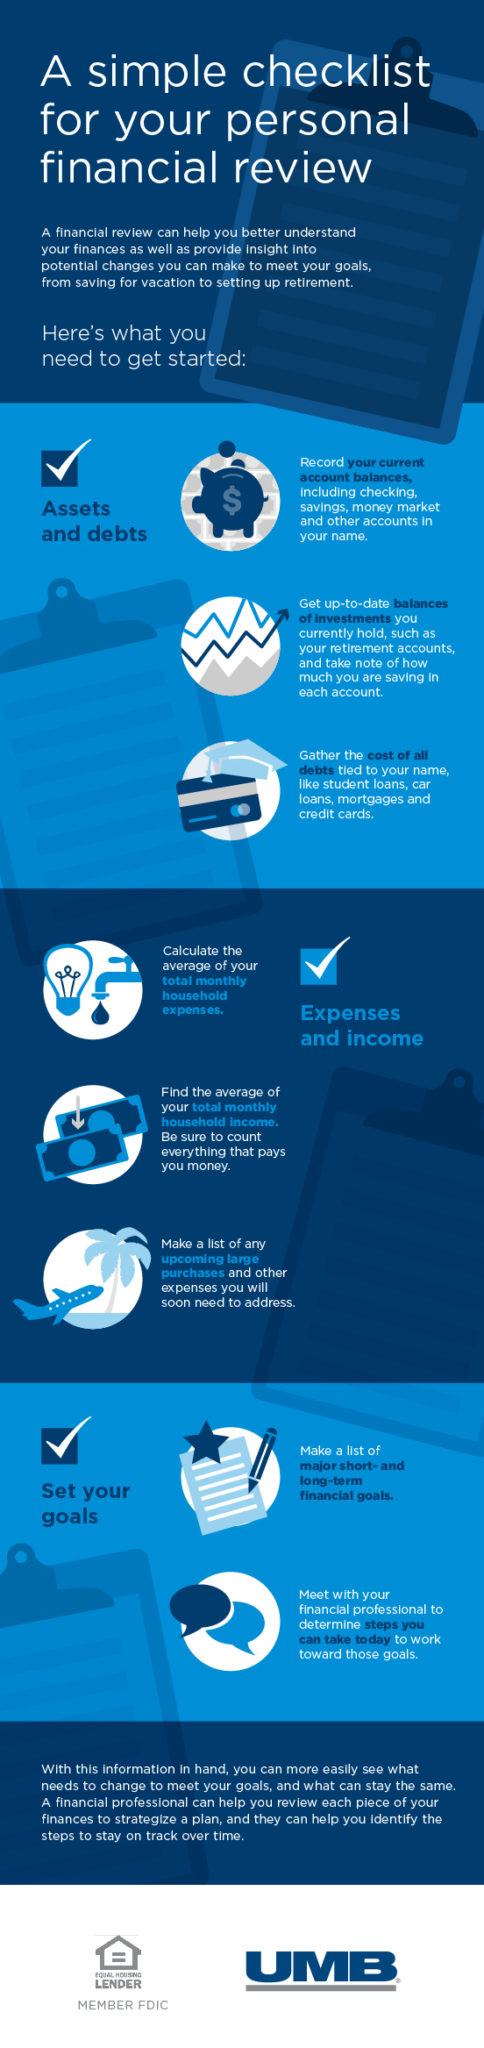 Financial review checklist infographic final